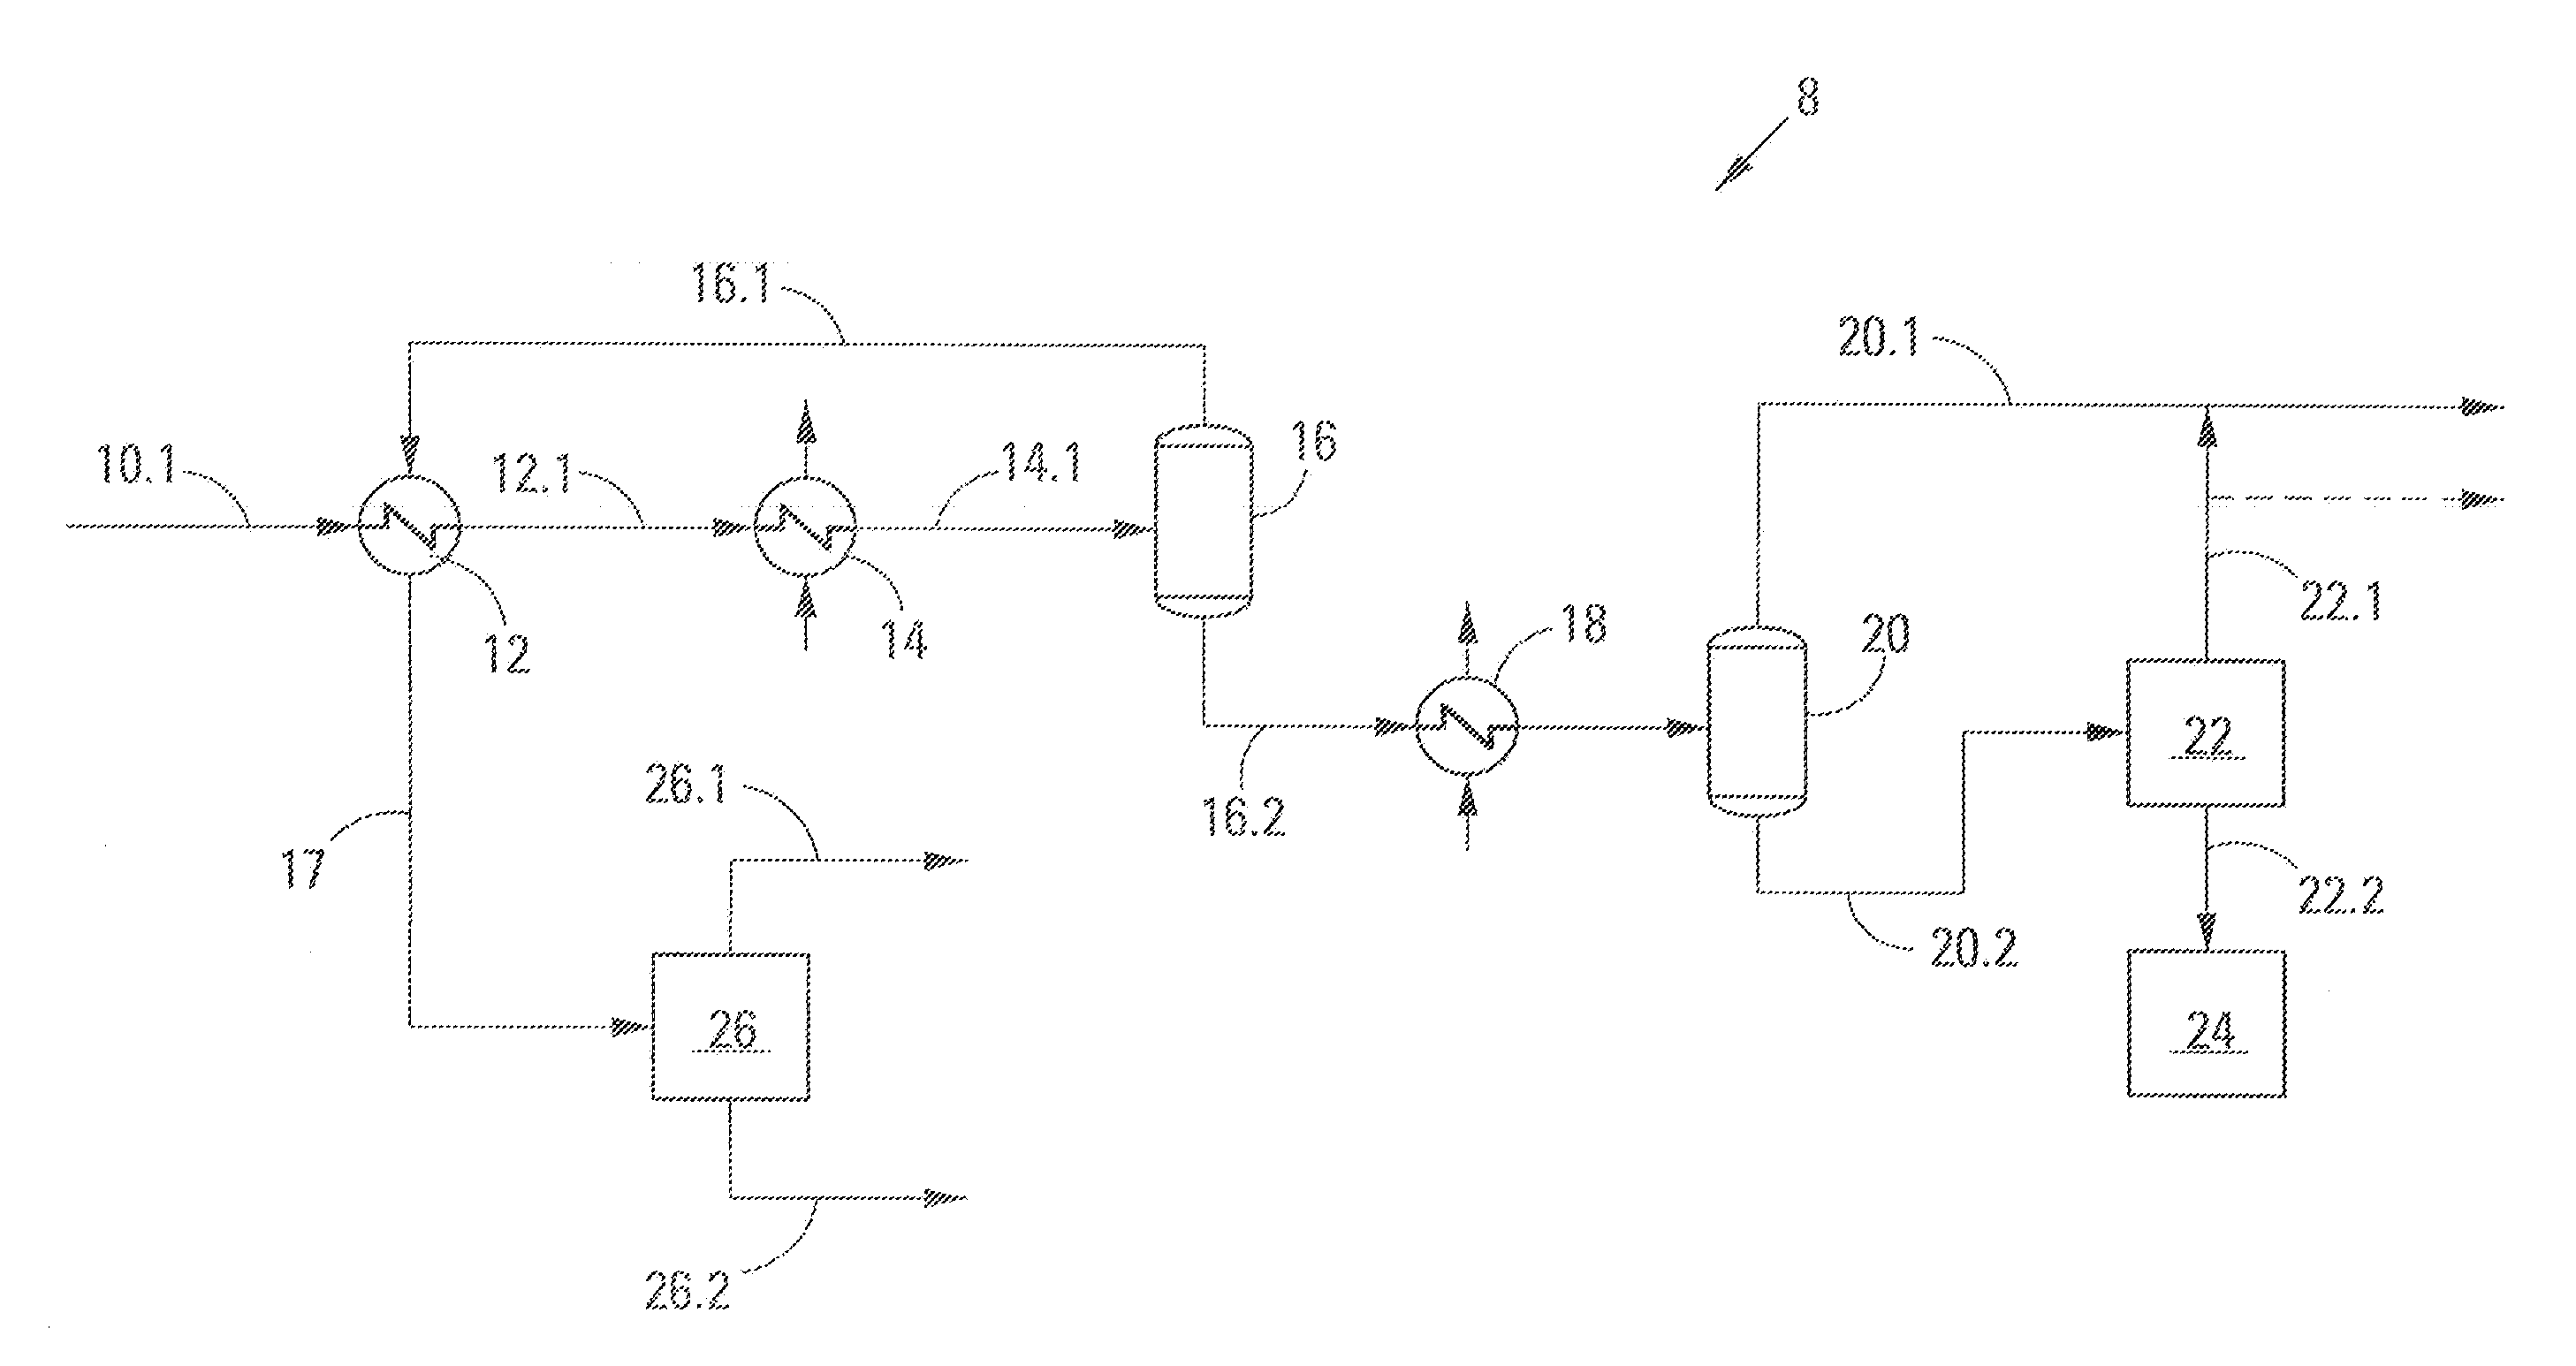 Separation of components from a multi-component hydrocarbon stream which includes ethylene